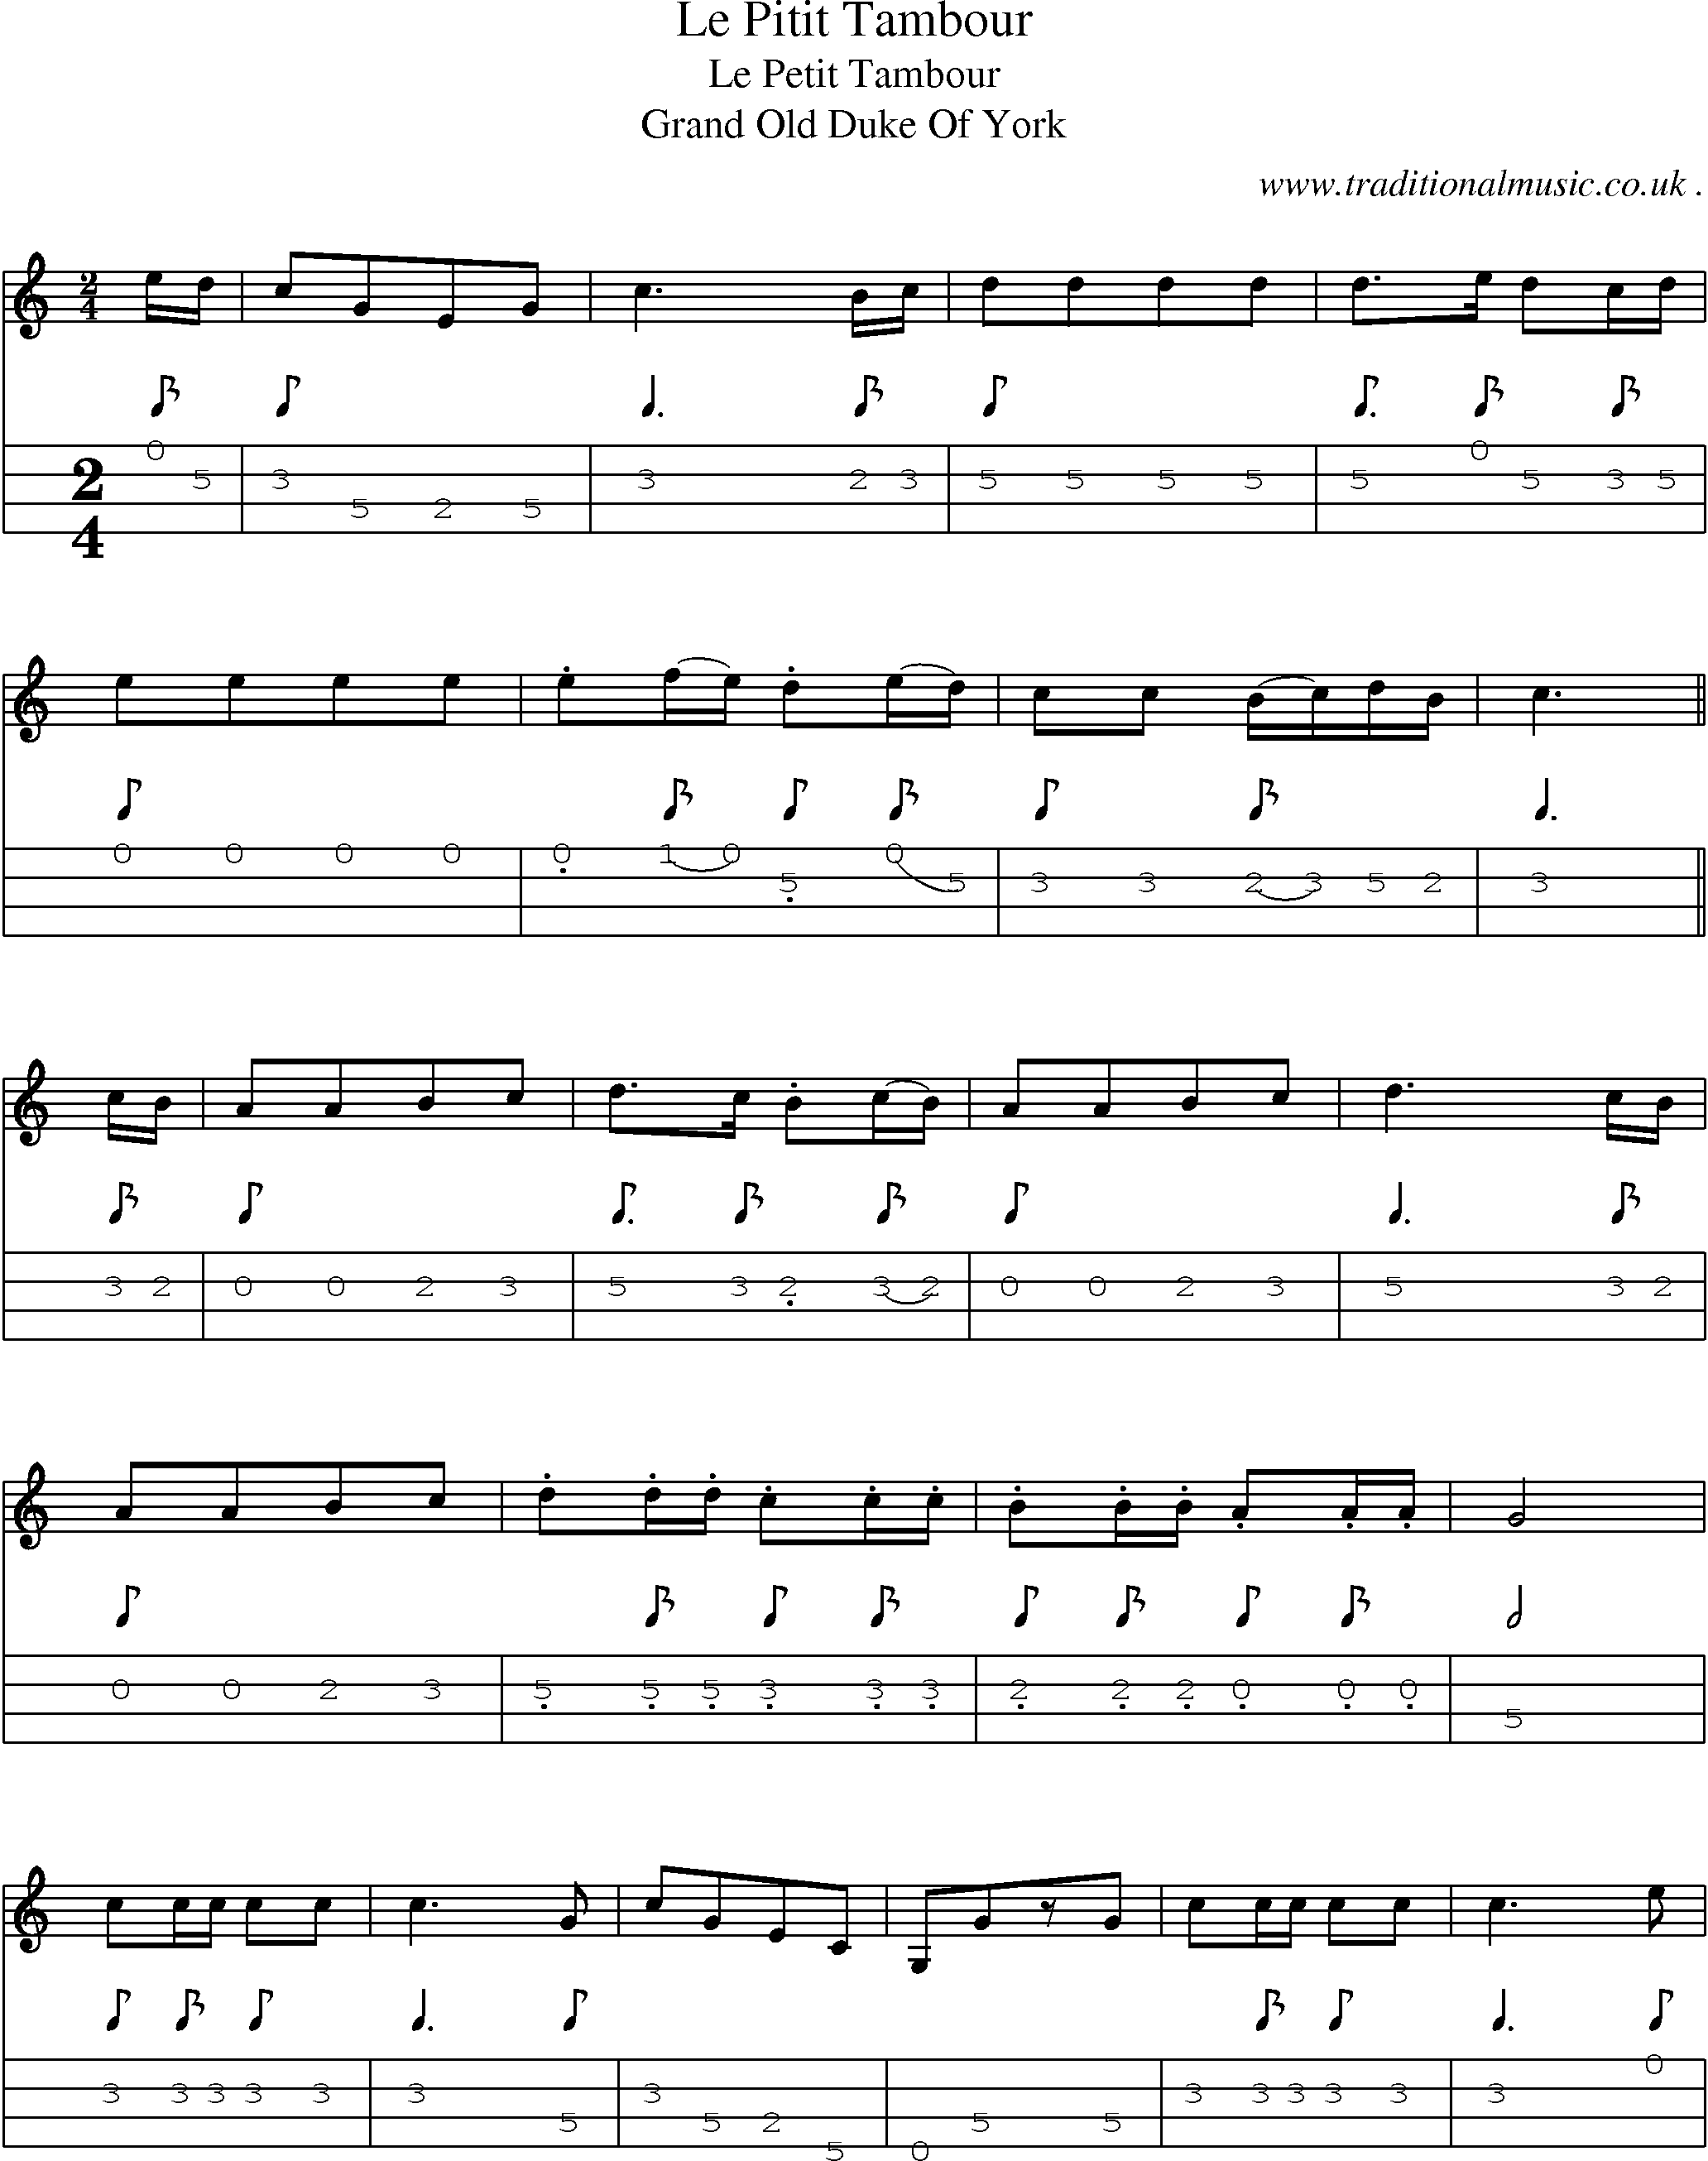 Sheet-Music and Mandolin Tabs for Le Pitit Tambour